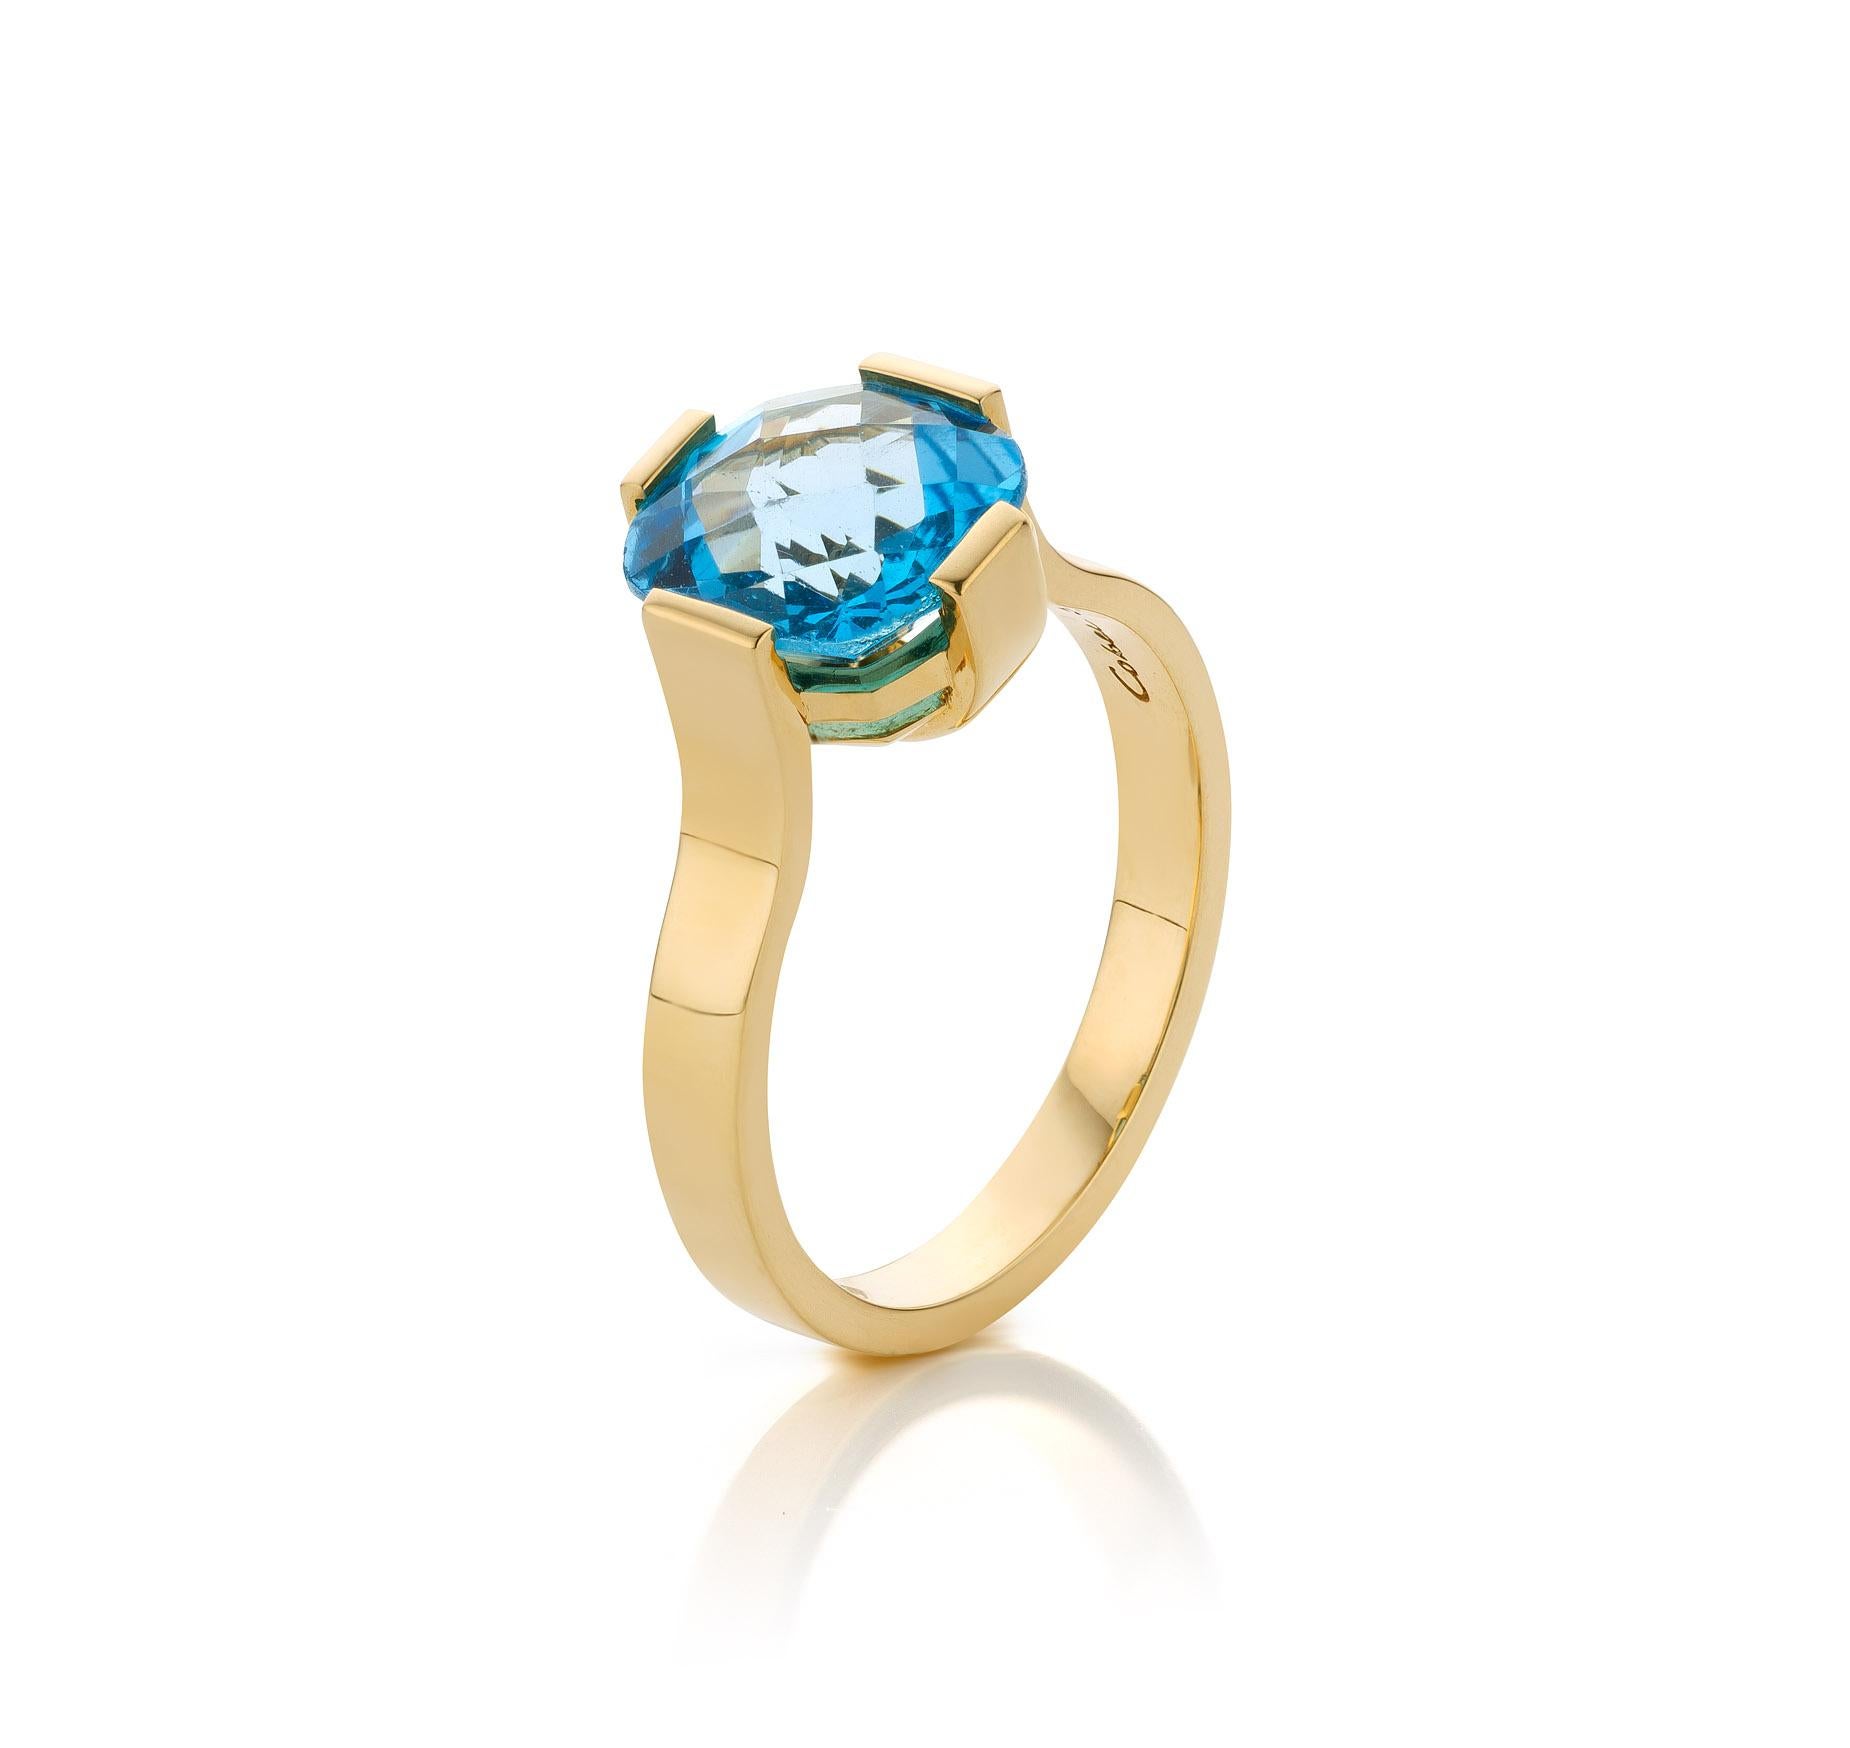 For Sale:  Cober “Blue Topaz Solitaire” set with a 3.25 Carat Blue Topaz Yellow Gold Ring 3